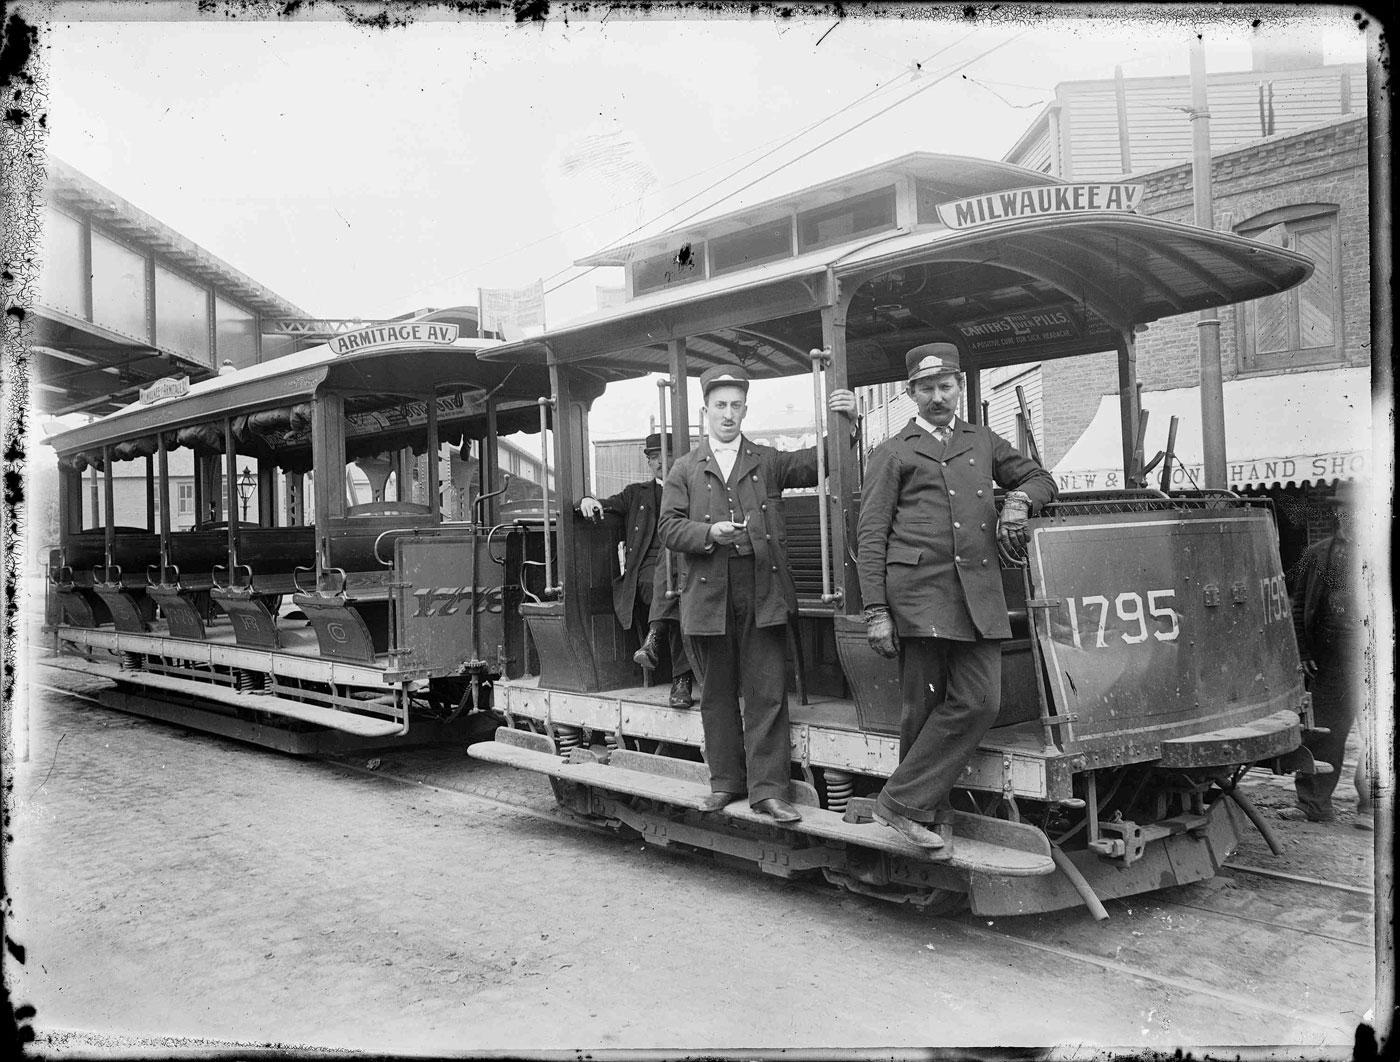 Chicago had the largest cable car system in the country in terms of ridership and actual cars. (Courtesy of the Chicago History Museum)